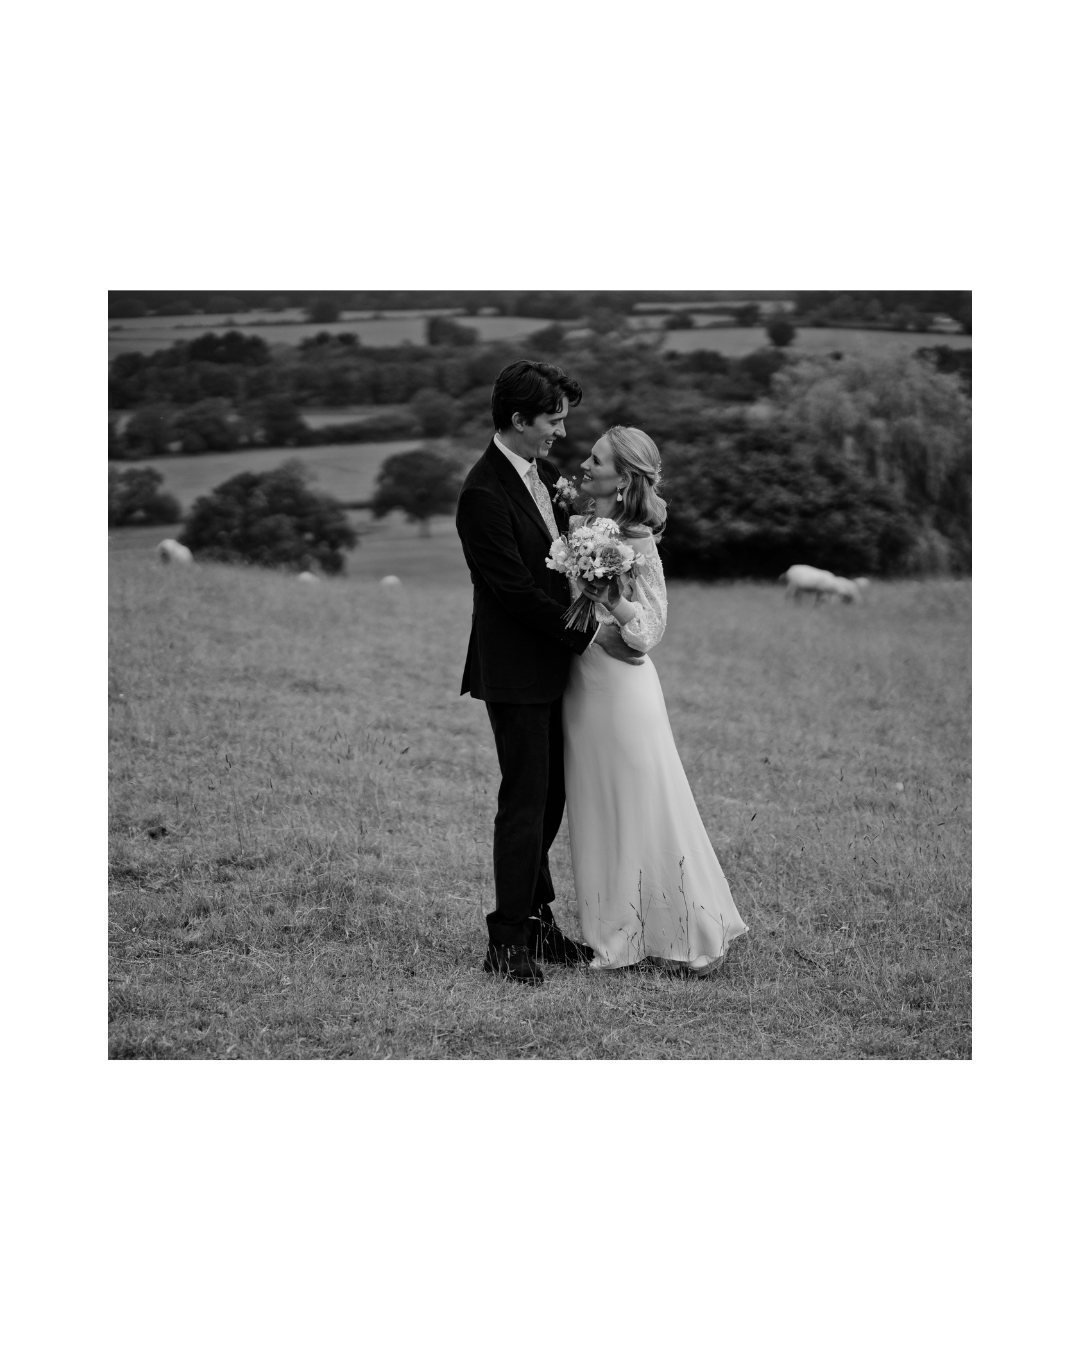 THROW BACK⁠
.⁠
to Joe &amp; Jemima's beautiful wedding, with their small village church and parents garden celebrations after. ⁠
.⁠
Full of nostalgia, romance and sentimentality.⁠
.⁠
We&rsquo;re always here for that 🖤⁠
.⁠
Planner: @tasha_mae_events⁠